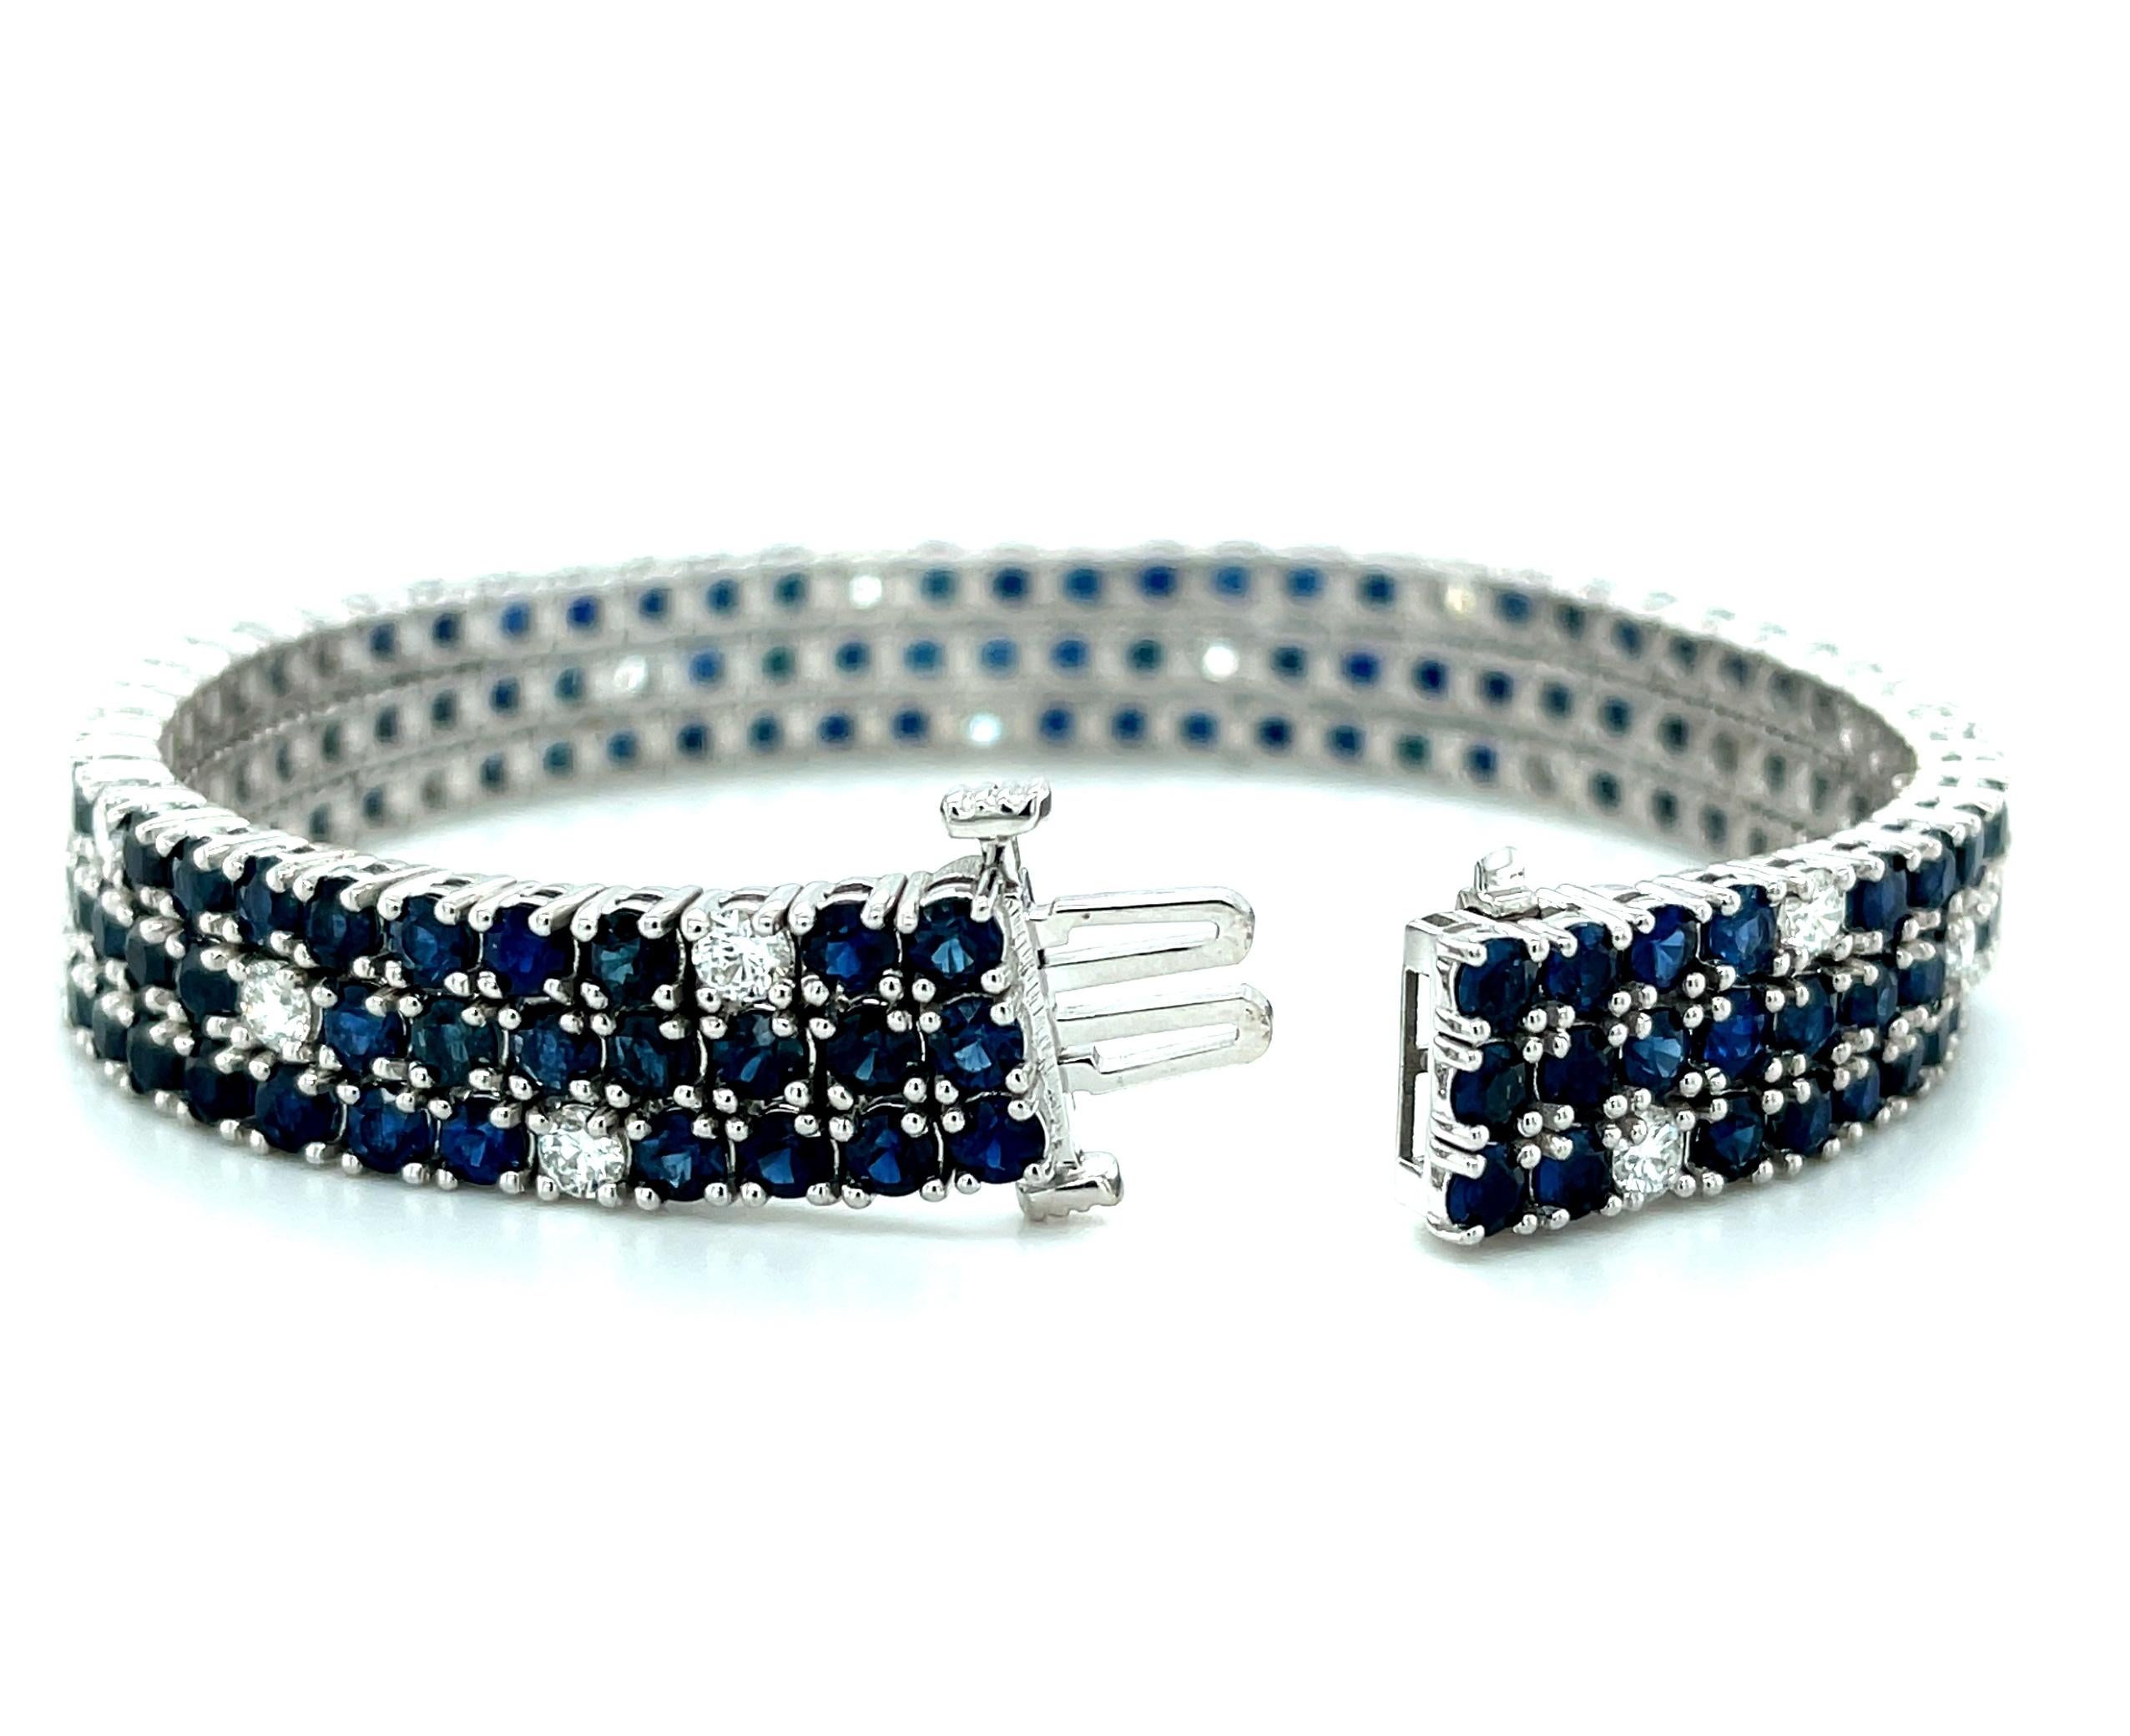 Round Cut Sapphire, Diamond Art Deco Inspired White Gold Tennis Bracelet 20 Carats Total For Sale